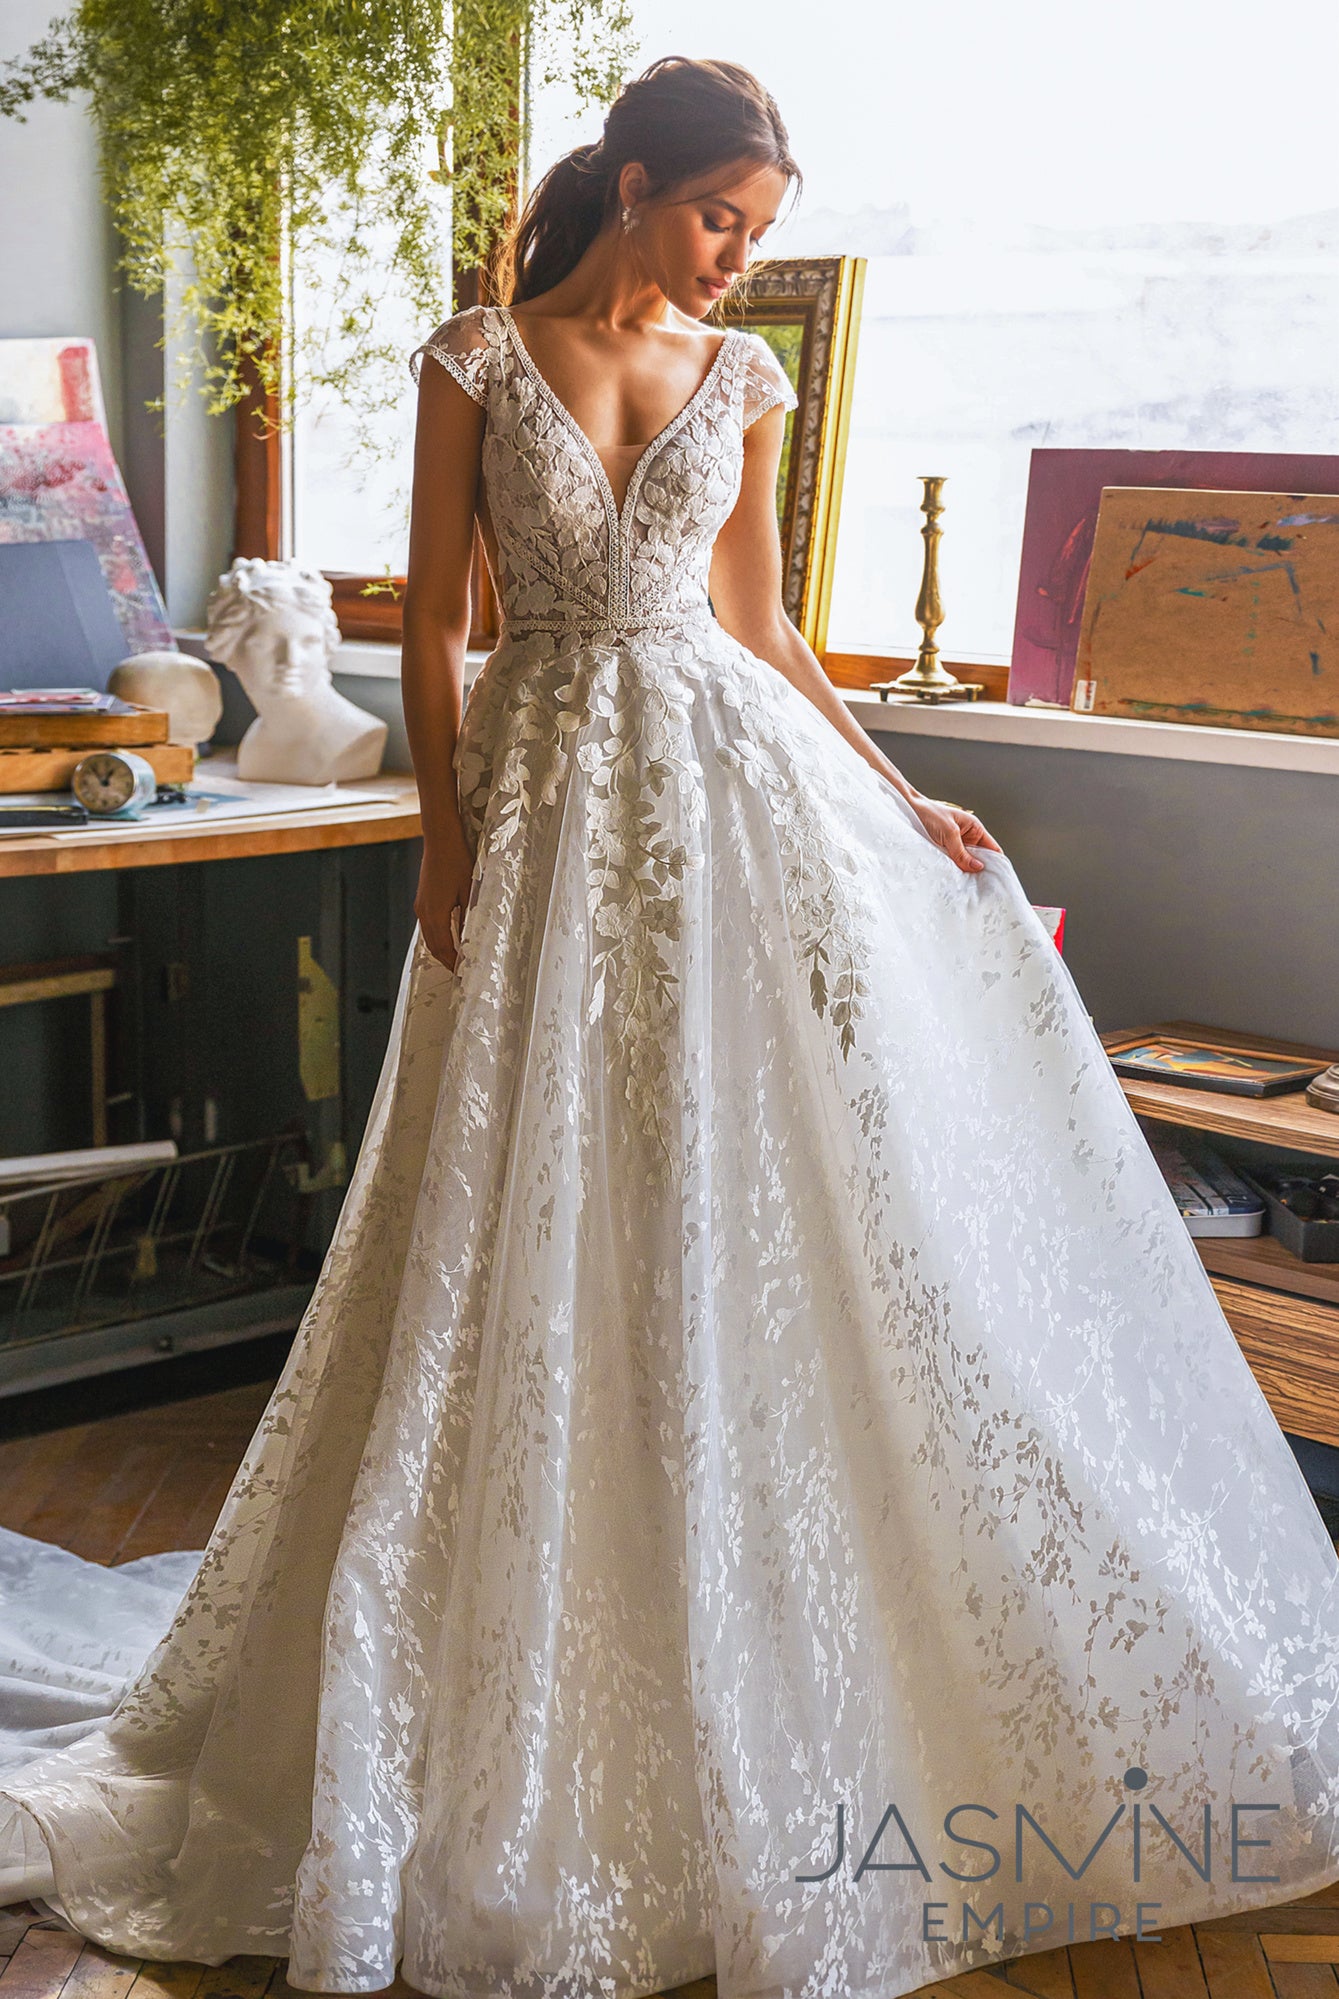 Empire Satin Sweetheart Neckline Wedding Dress With Illusion Train,  Sweetheart Neckline, Covered Buttons, And Lace Applique From Lpdqlstudio,  $125.38 | DHgate.Com